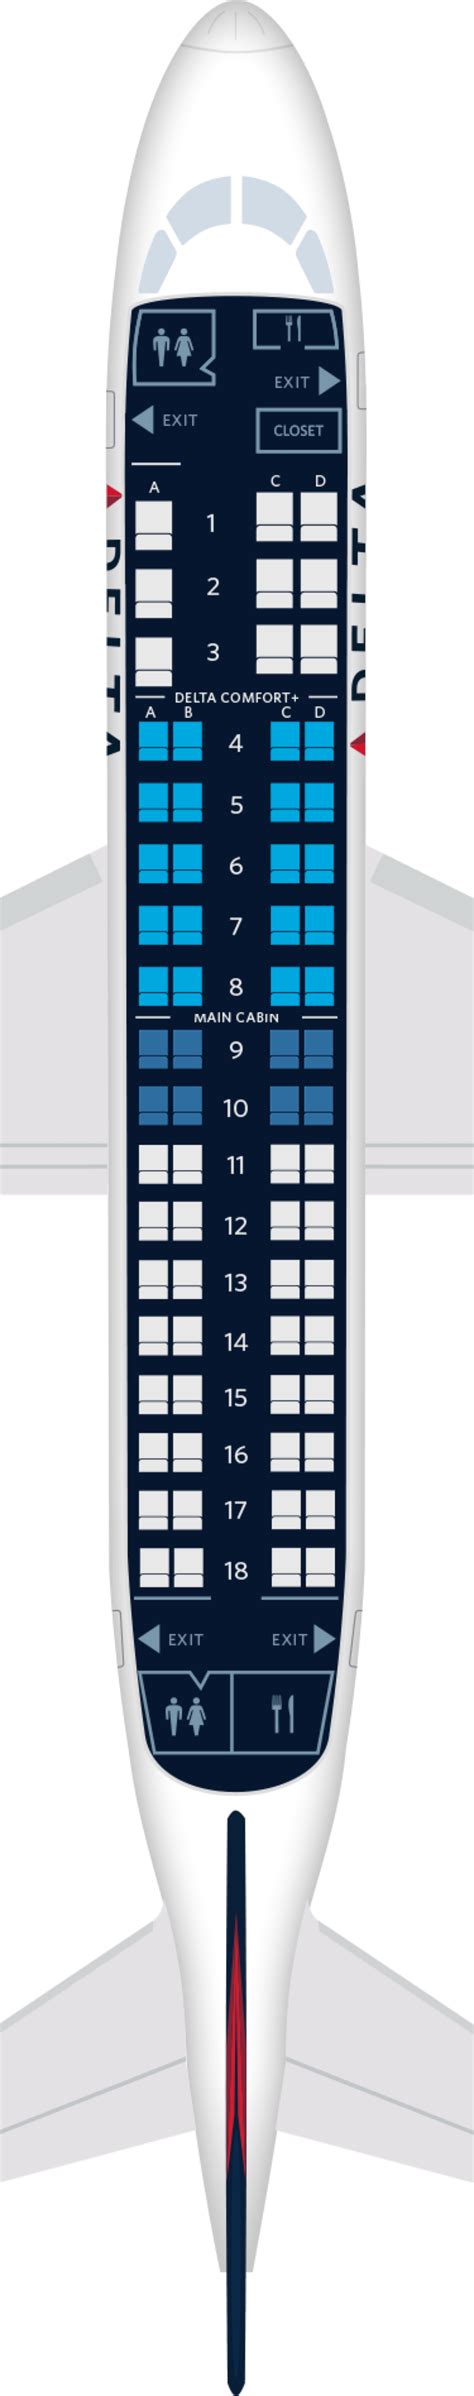 Embraer E 170 Seat Maps Specs And Amenities Delta Air Lines